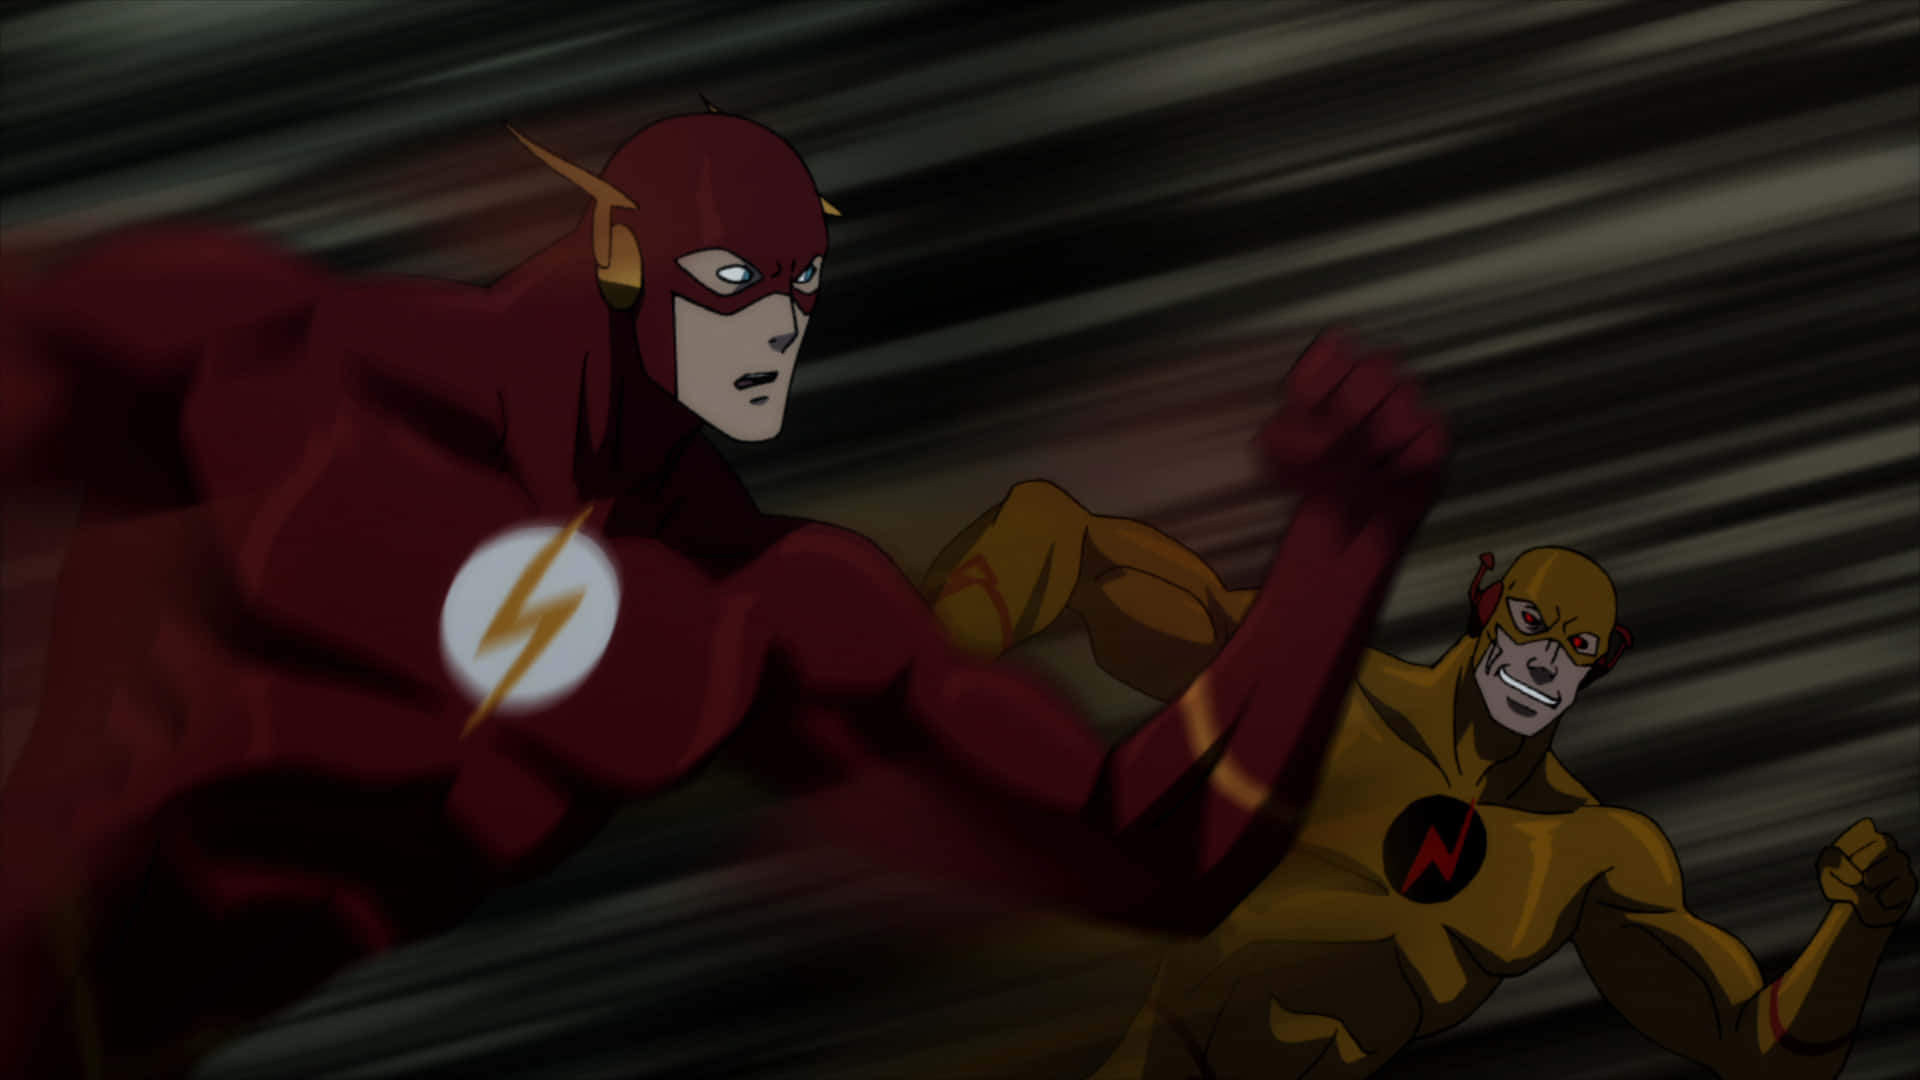 The Flash from Justice League: The Flashpoint Paradox in an action pose Wallpaper